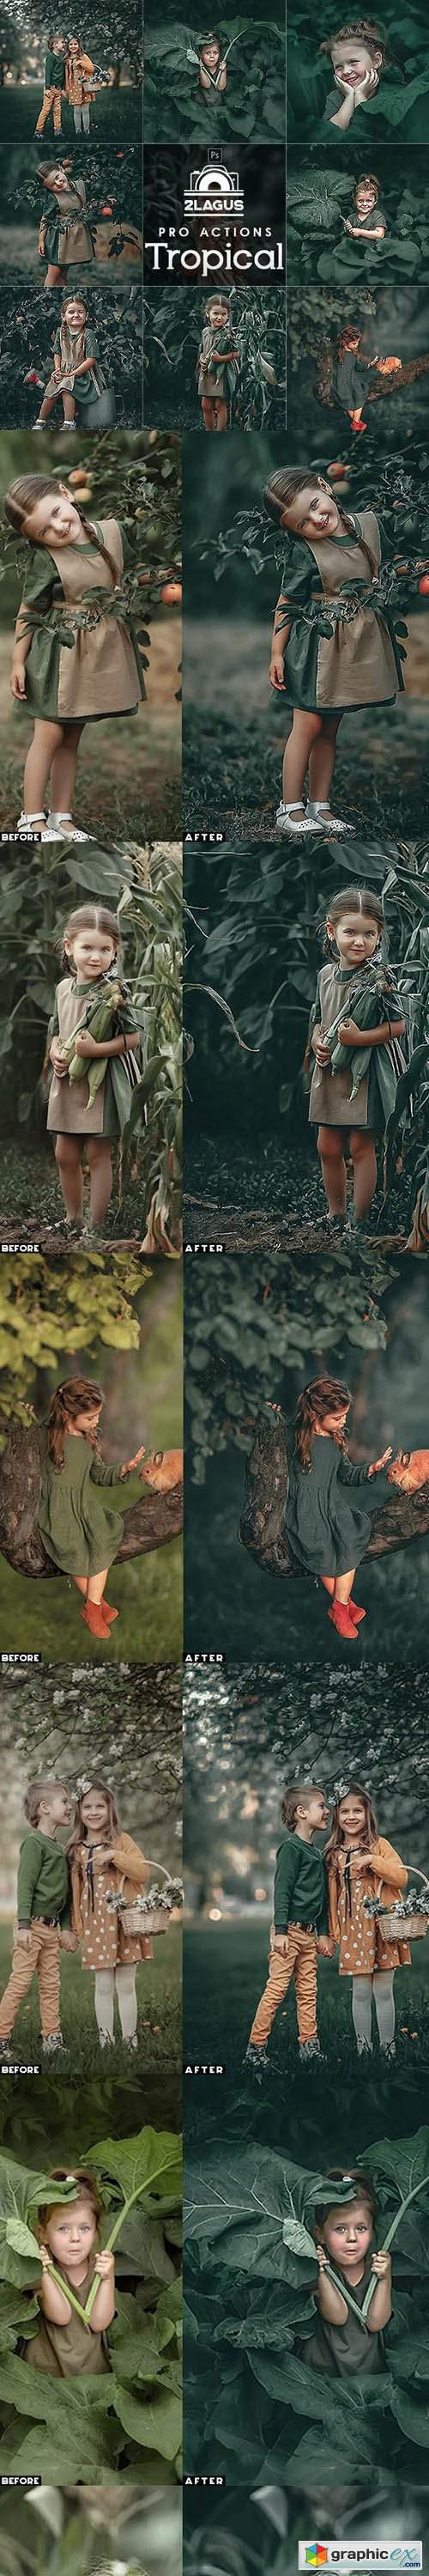 Tropical Photoshop Actions